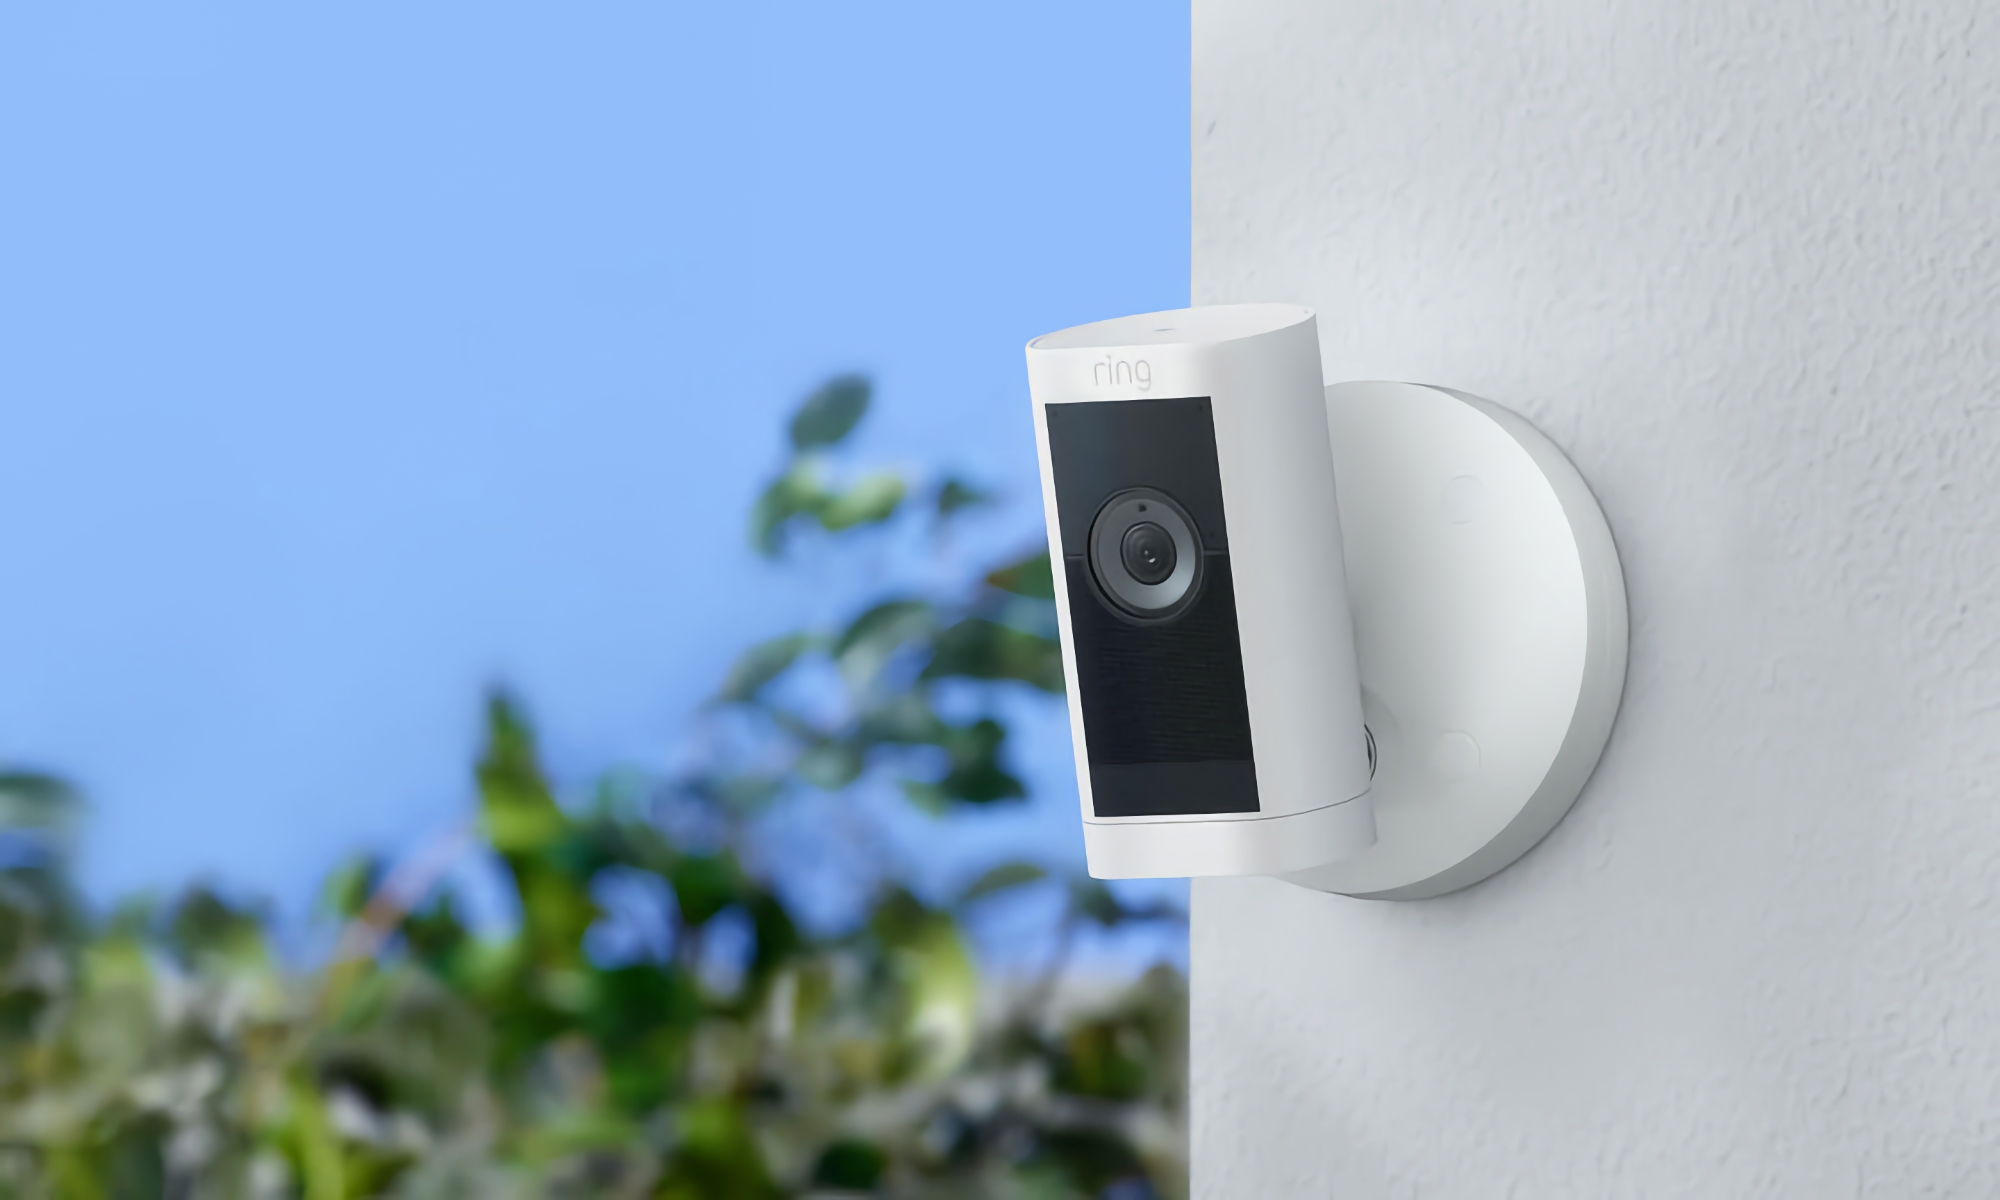 Amazon product photo of the Ring Stick Up Cam Pro. The security camera has a white body and black area near its lens. It's mounted on an outdoor stucco wall with blue sky and green trees visible on the blurred background.